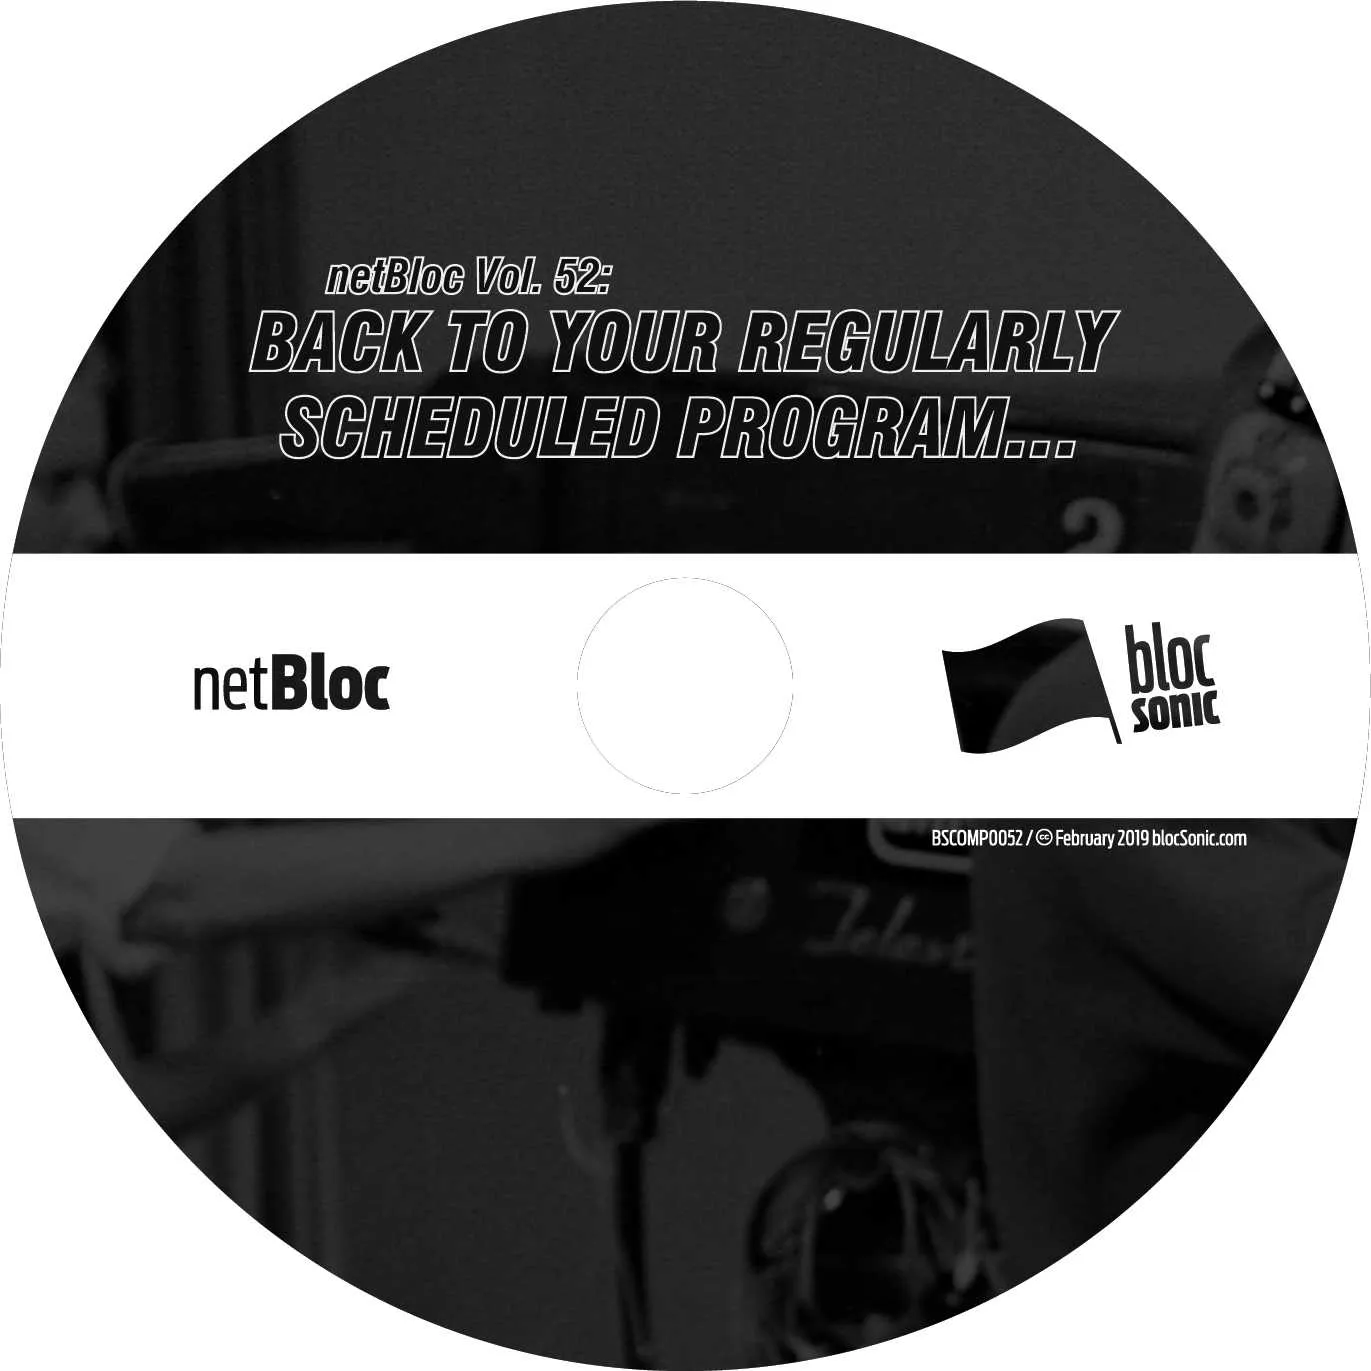 Album disc for “netBloc Vol. 52: Back to your regularly scheduled program” by Various Artists